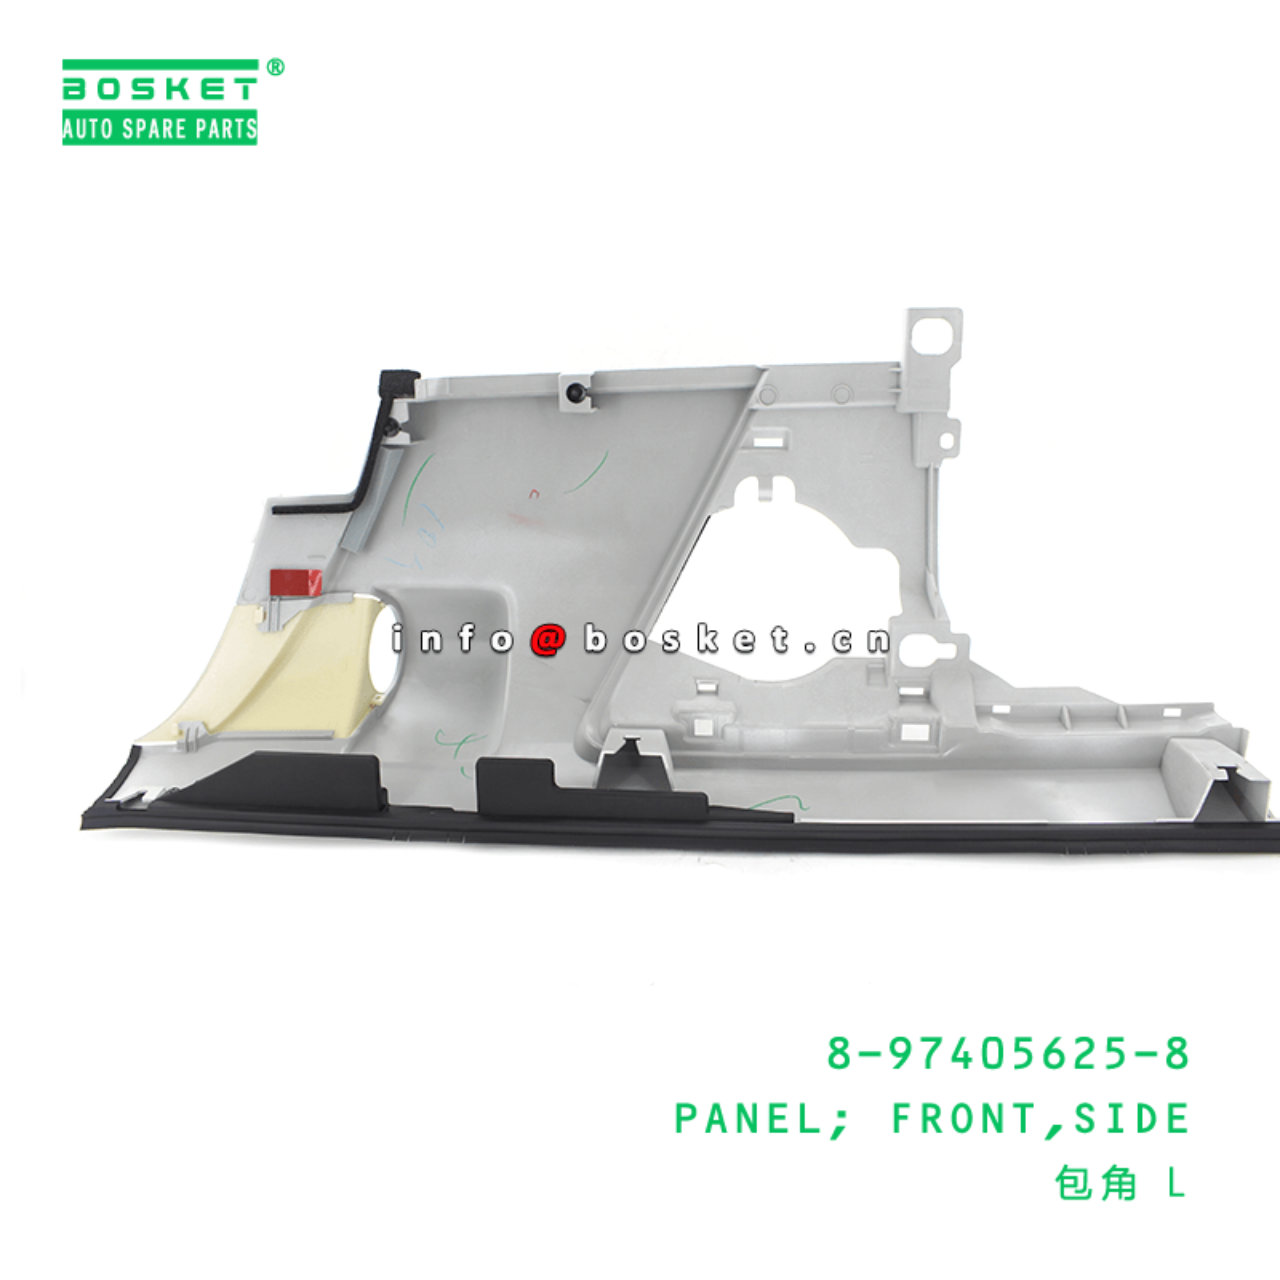 8-97405625-8 Side Front Panel 8974056258 Suitable for ISUZU NLR85